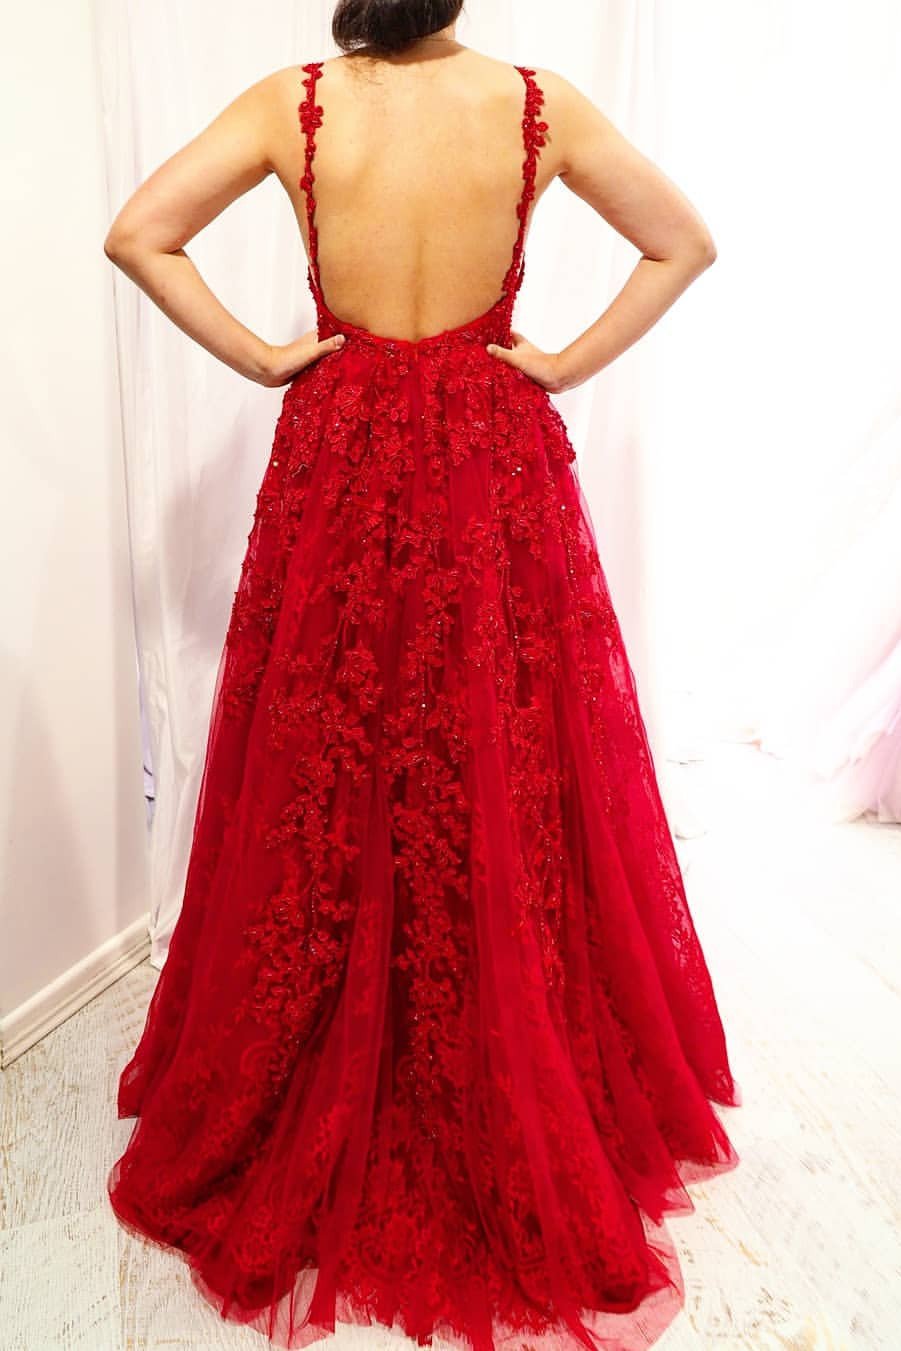 Backless Red Long Prom Dresses, V-neck Appliqued Sleeveless Evening Gowns MP82